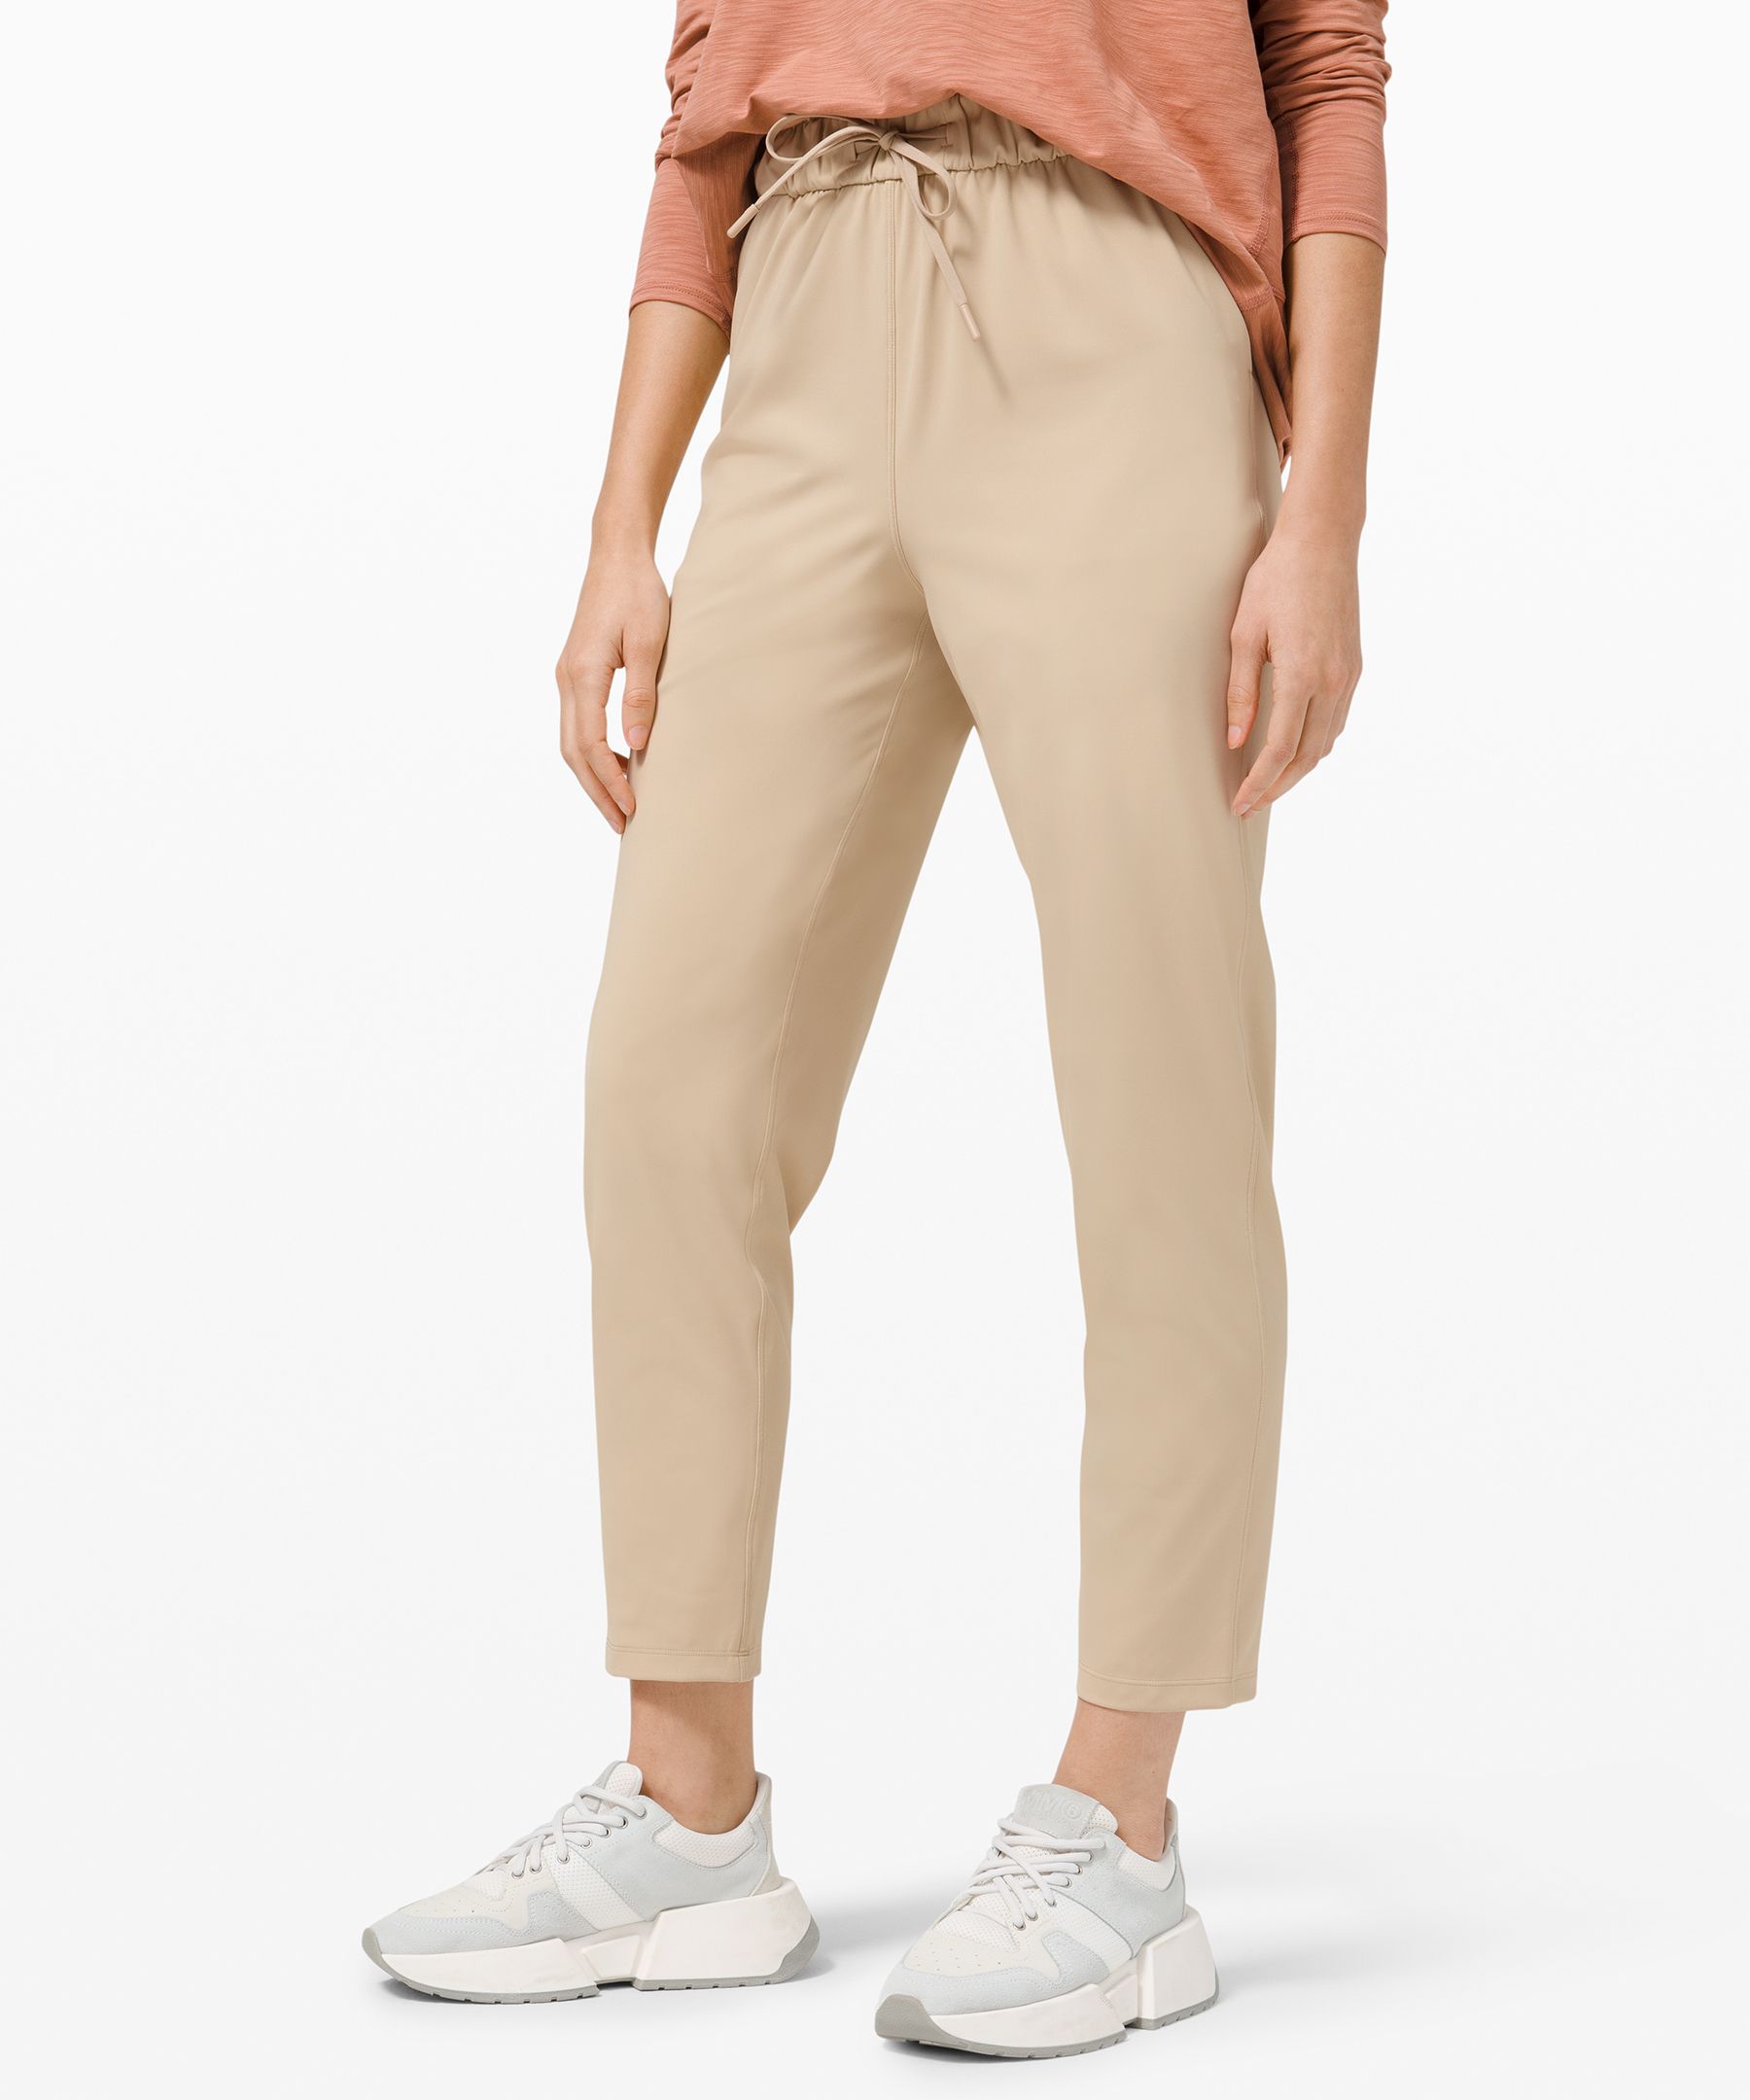 Lululemon Stretch High-rise Pants 7/8 Length In Prosecco